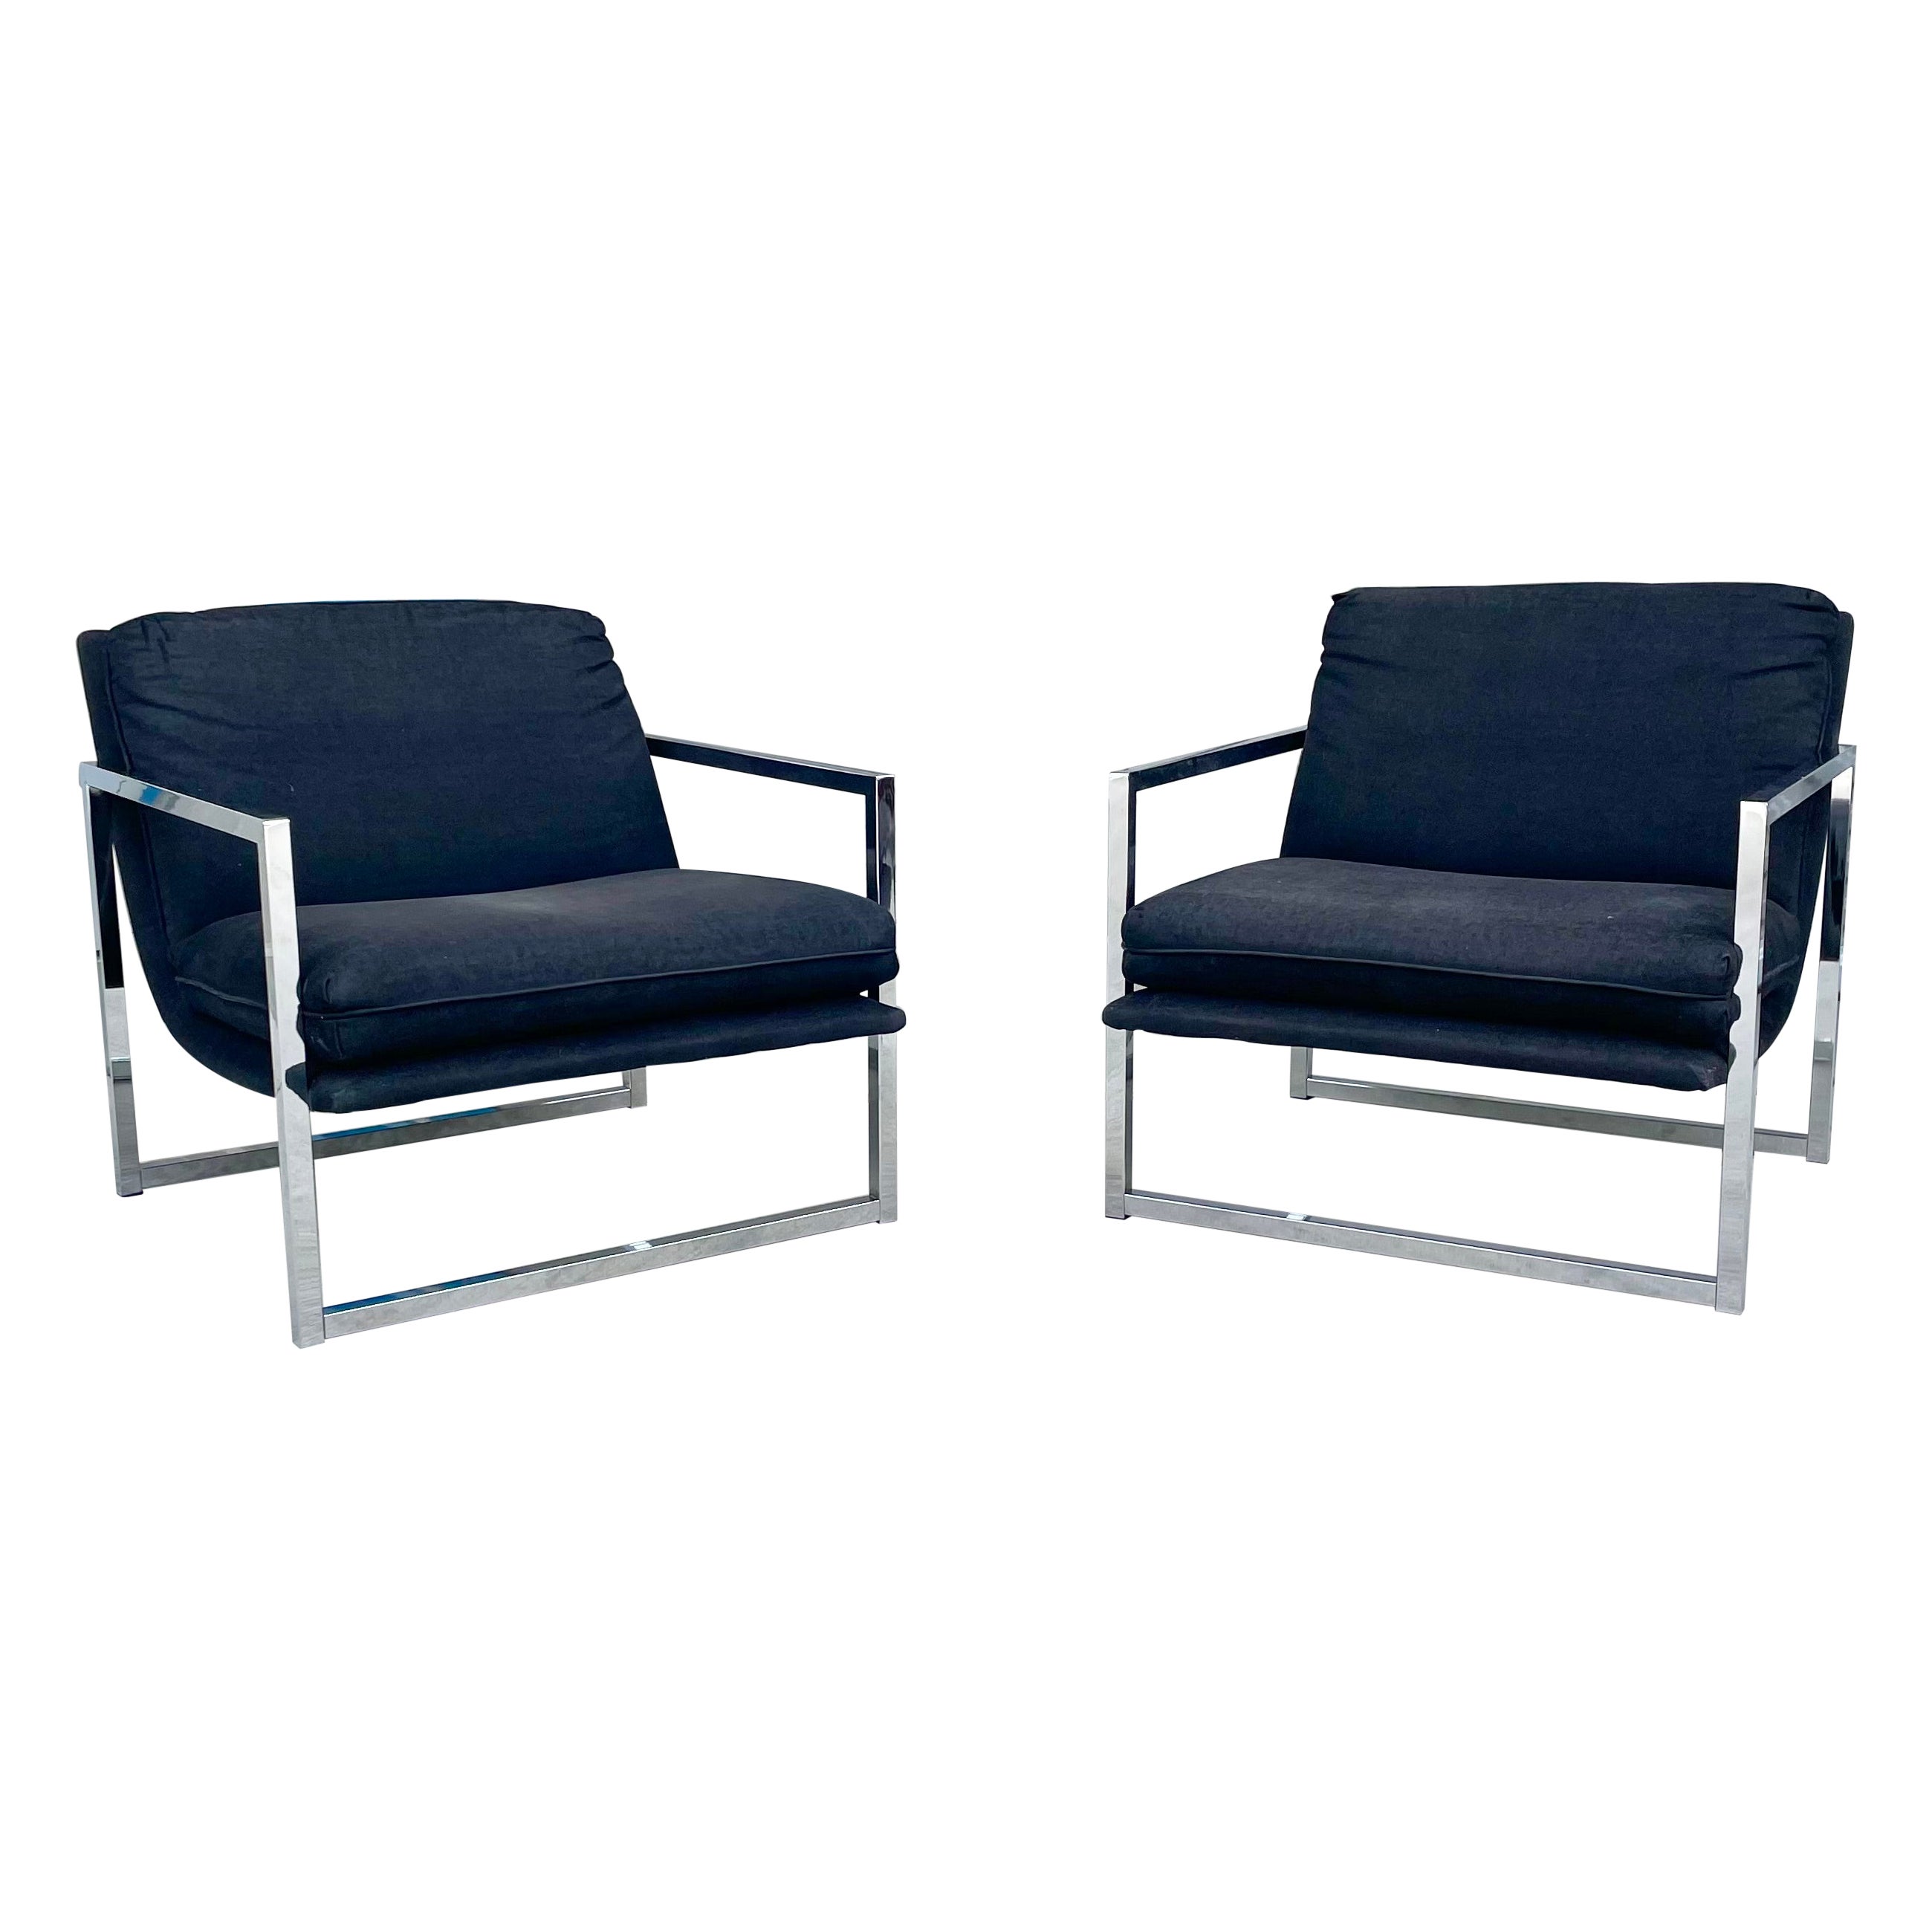 1970s Vintage Chrome "Scoop" Lounge Chairs Styled After Milo Baughman - a Pair